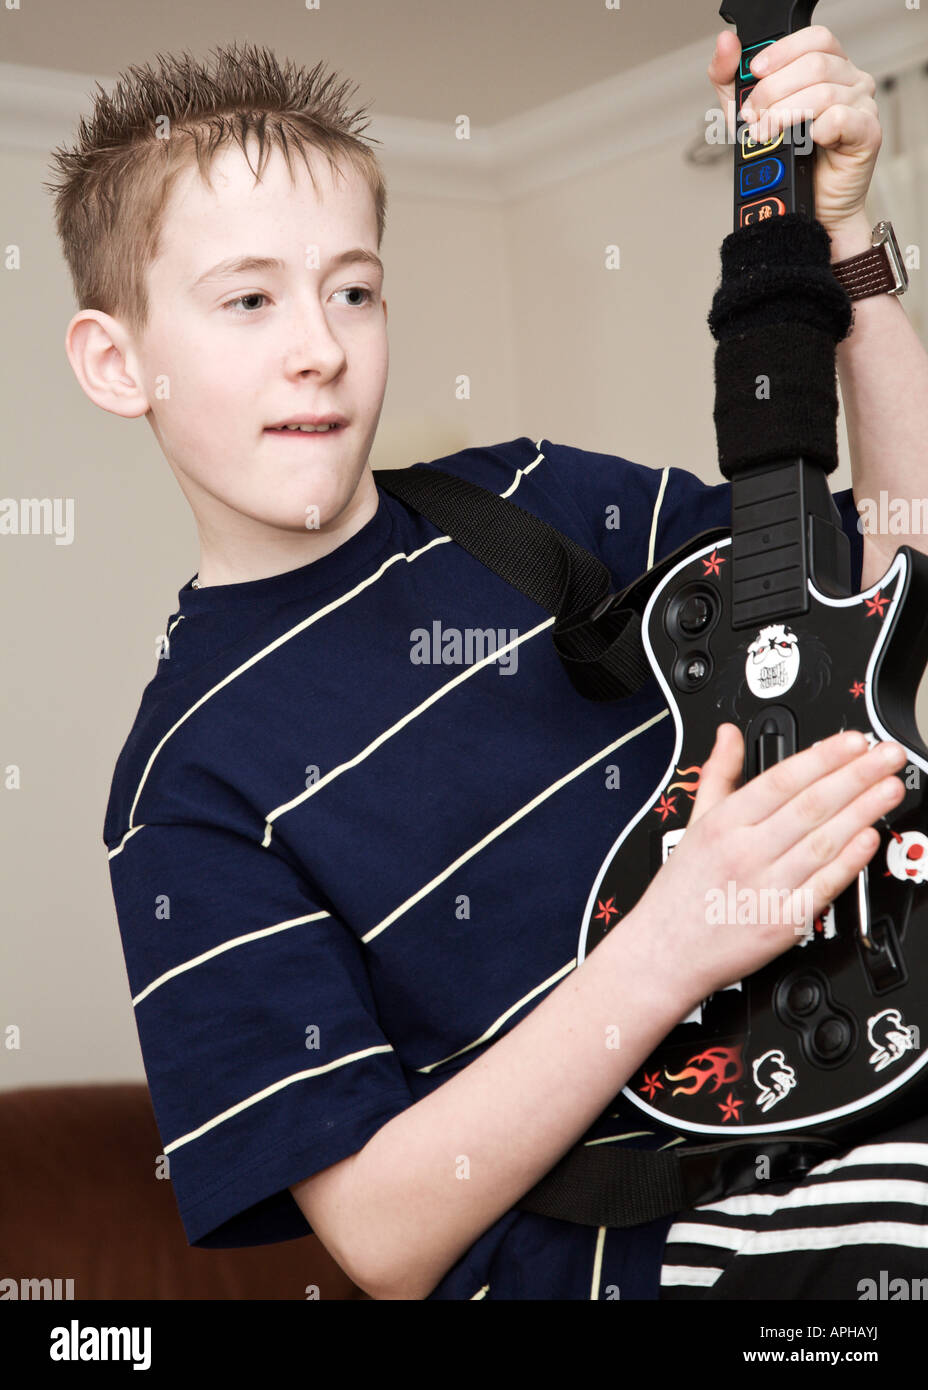 Youth playing Guitar Hero console game Stock Photo